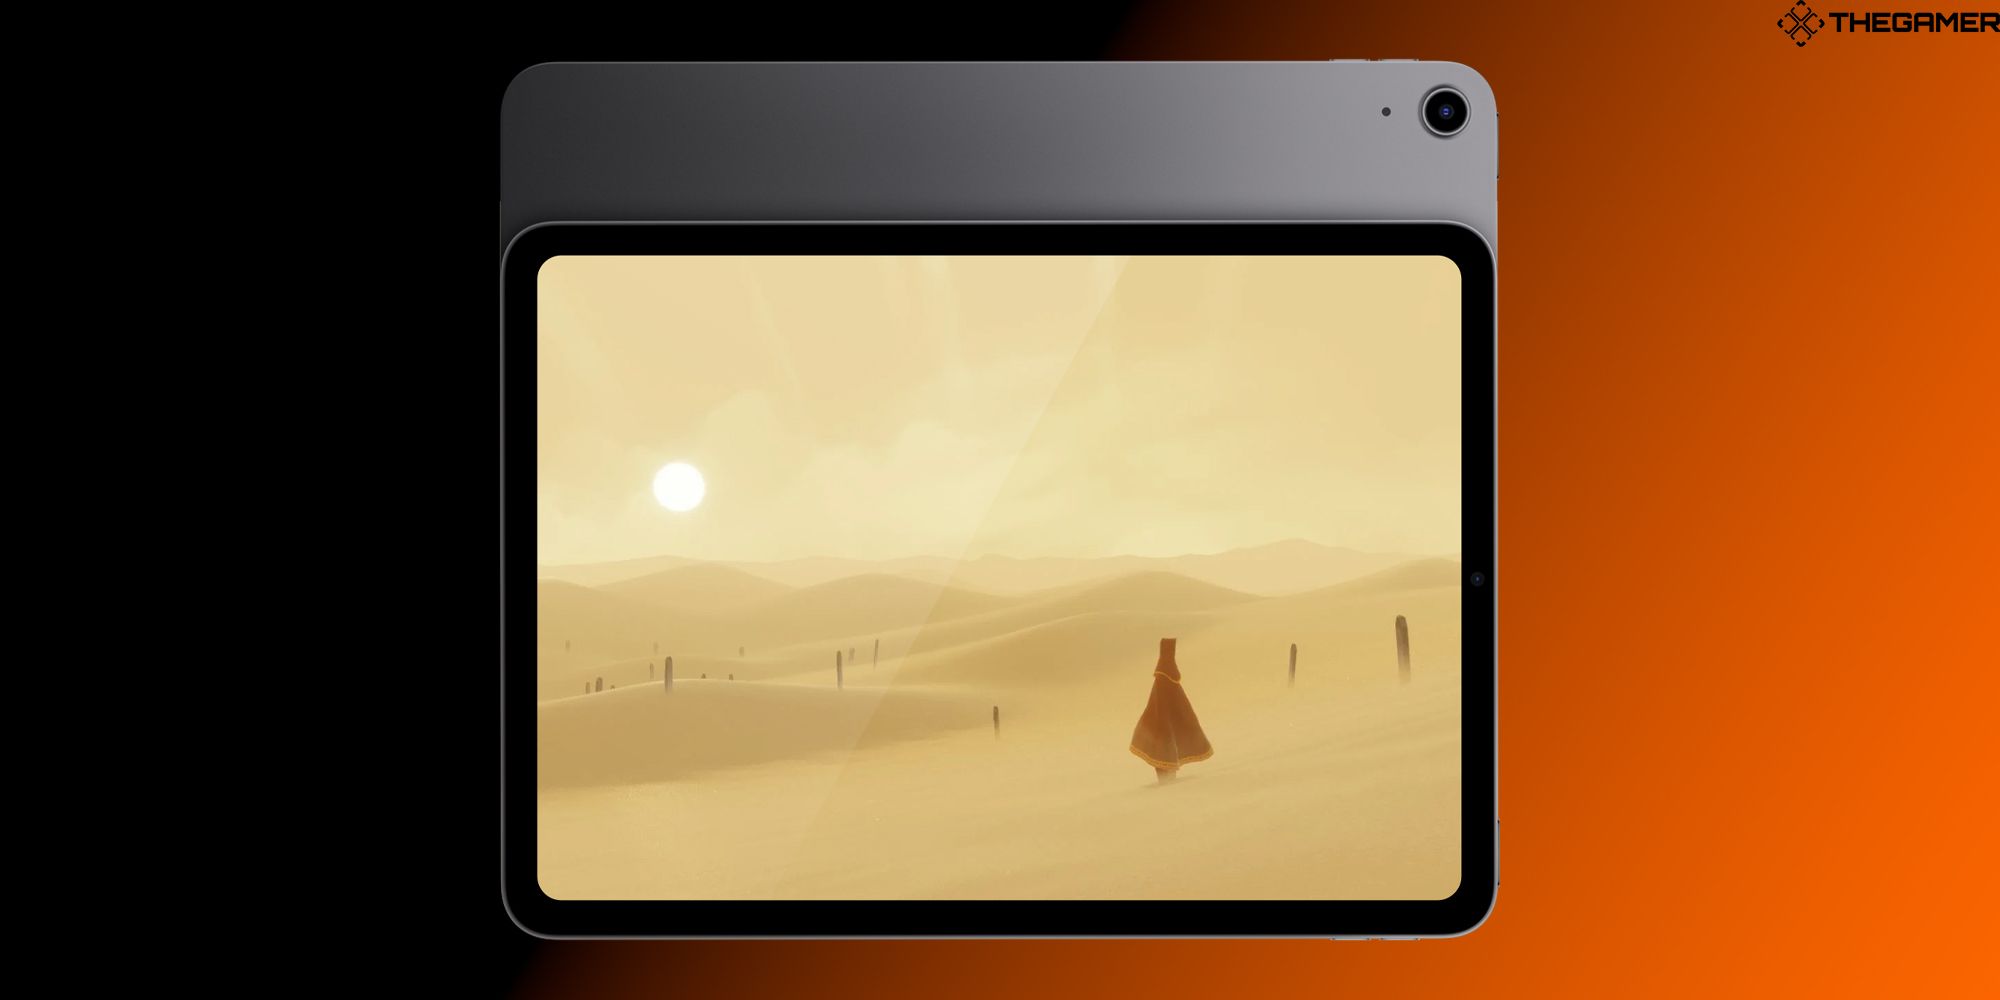 A screenshot of the game Journey on an iPad against a black and orange background.